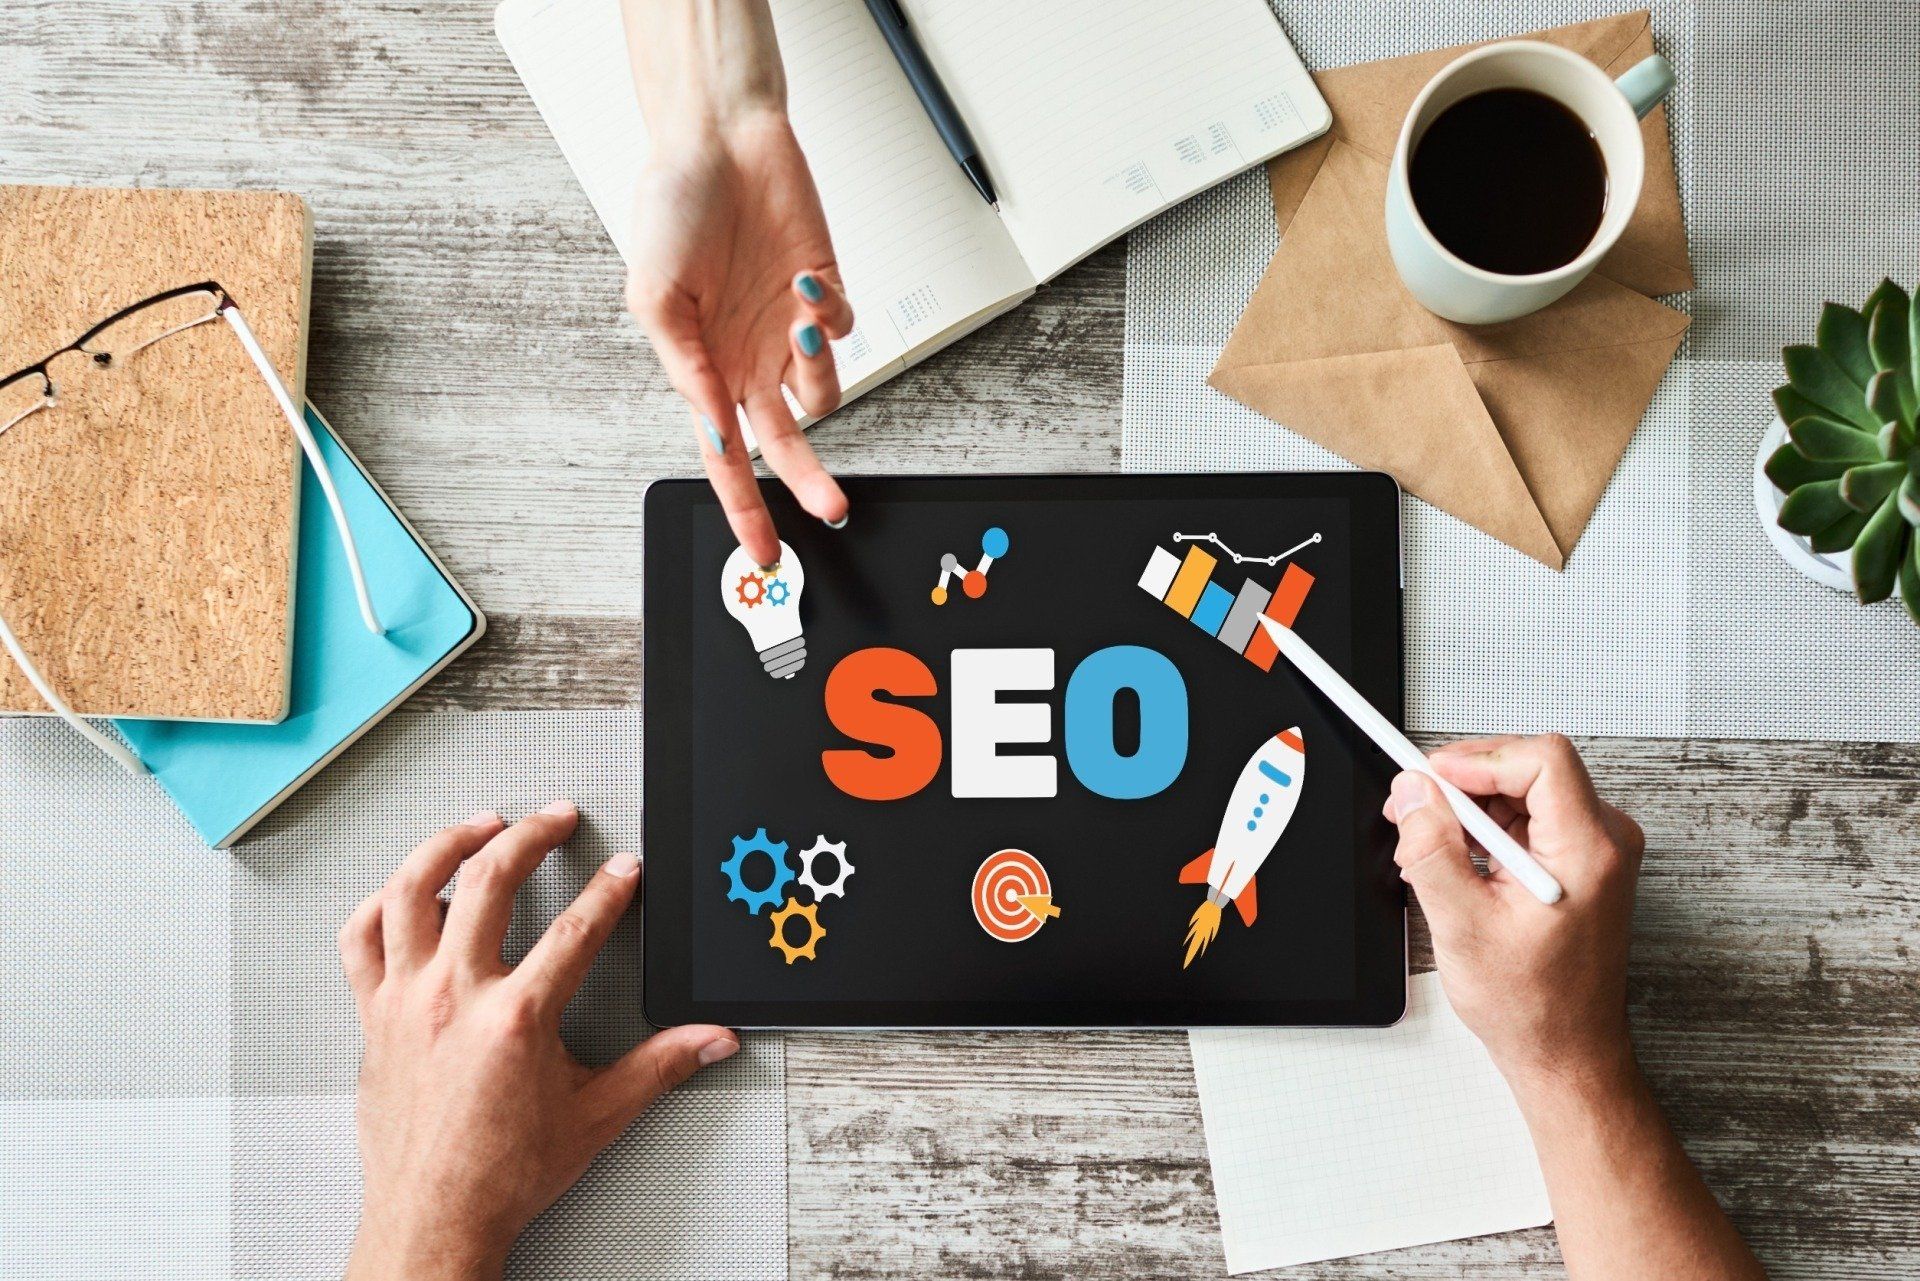 SEO For Small Businesses